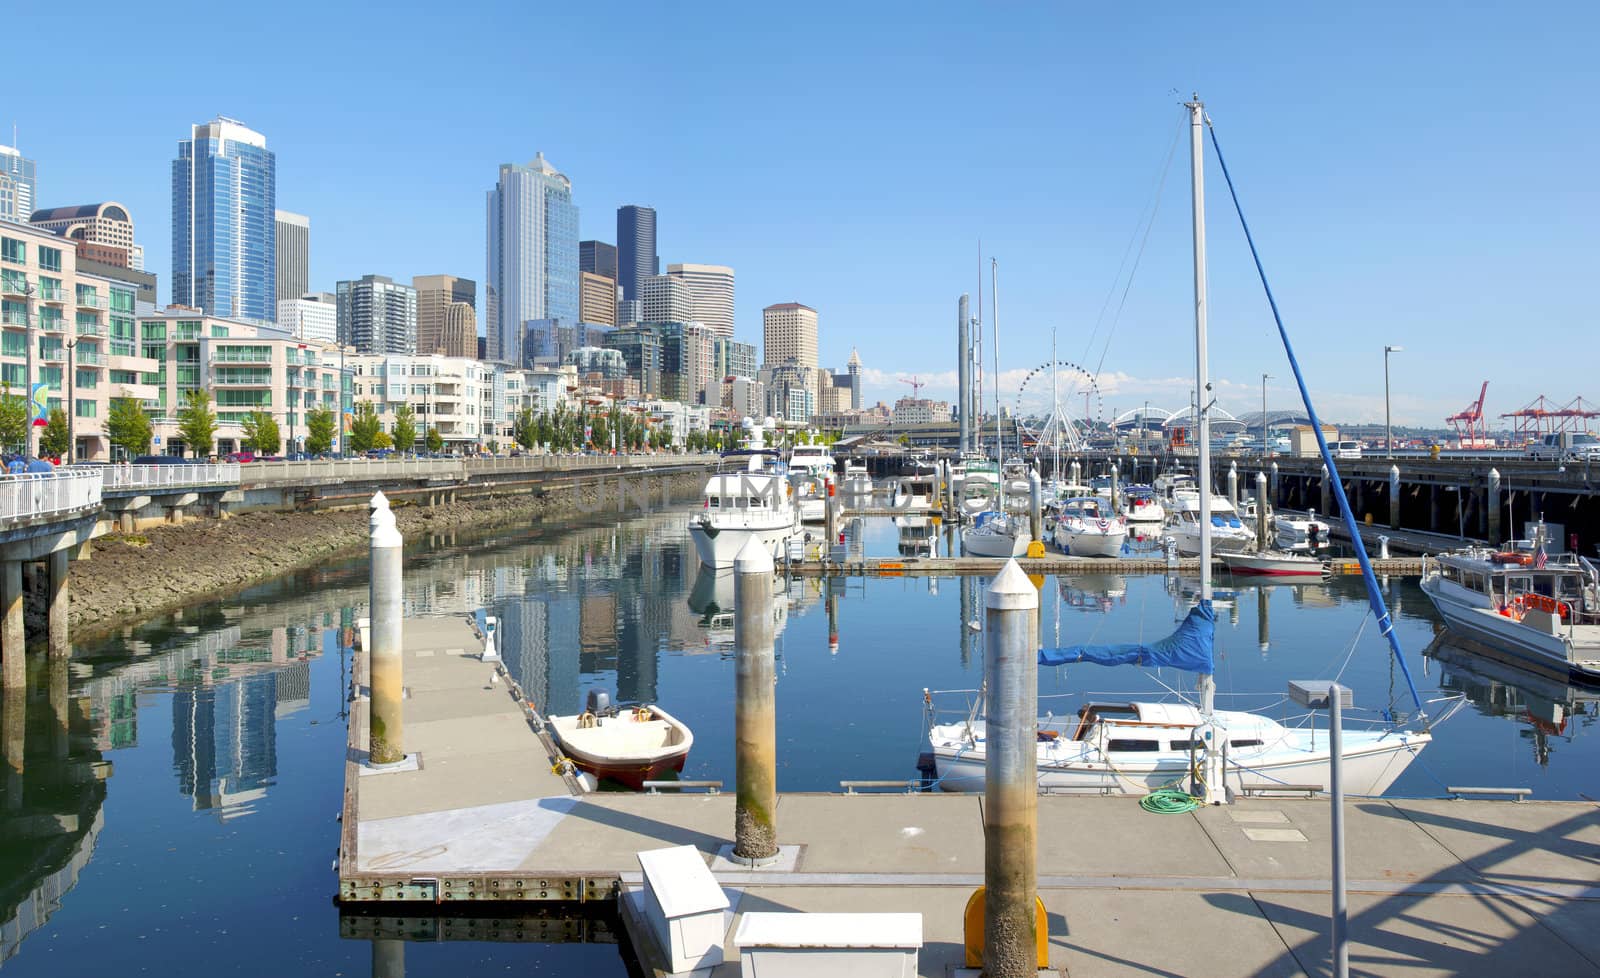 Seattle pier 66 marina and skyline. by Rigucci